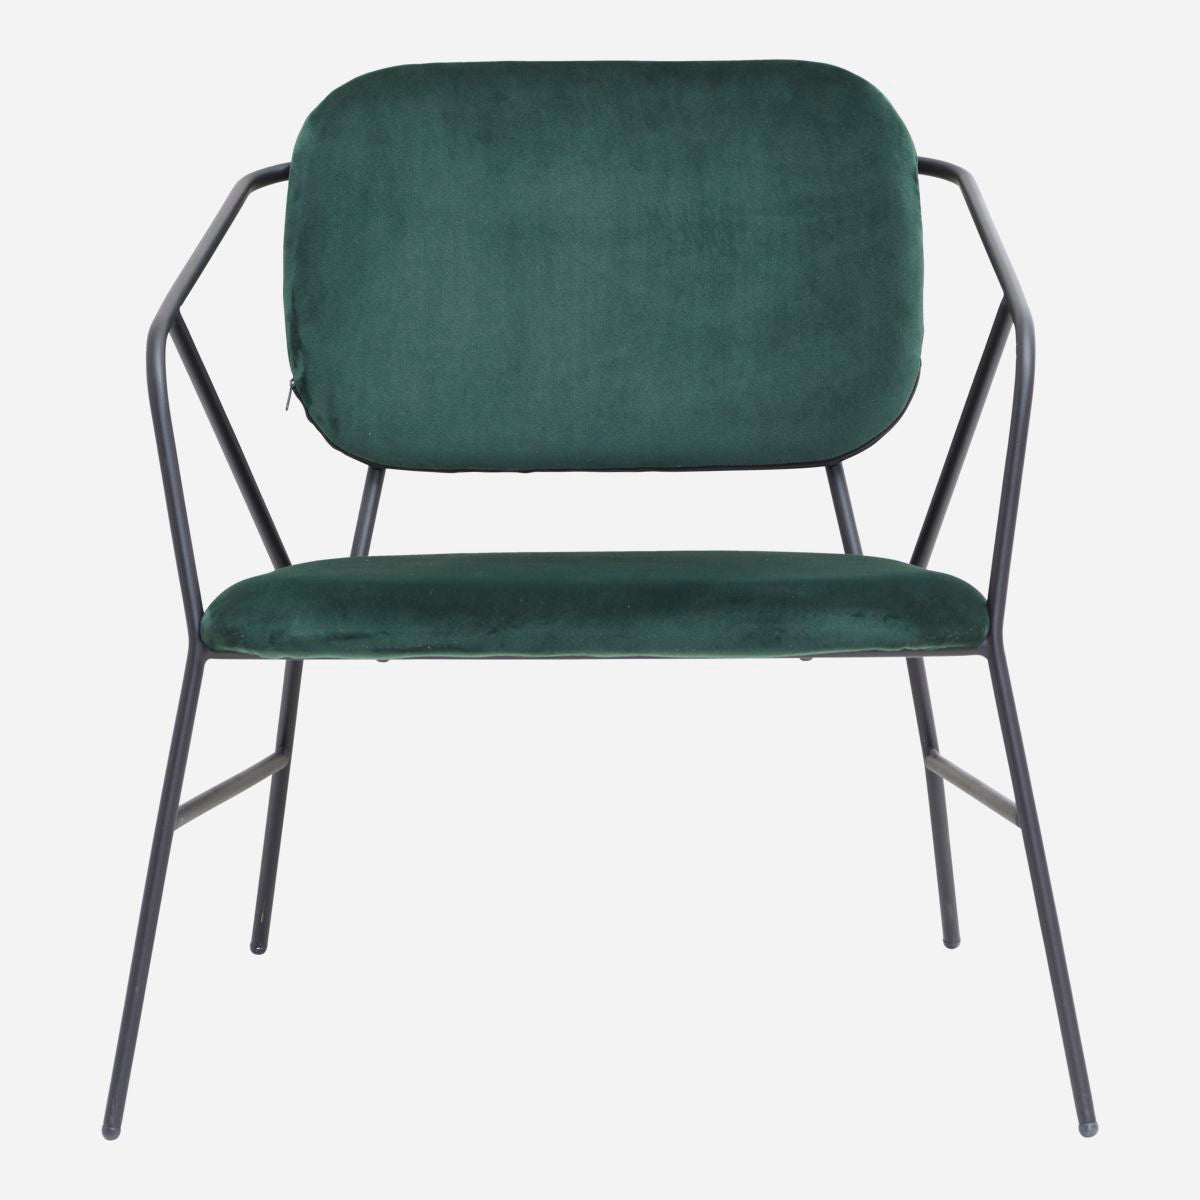 Lounge chair, Klever, Green House Doctor